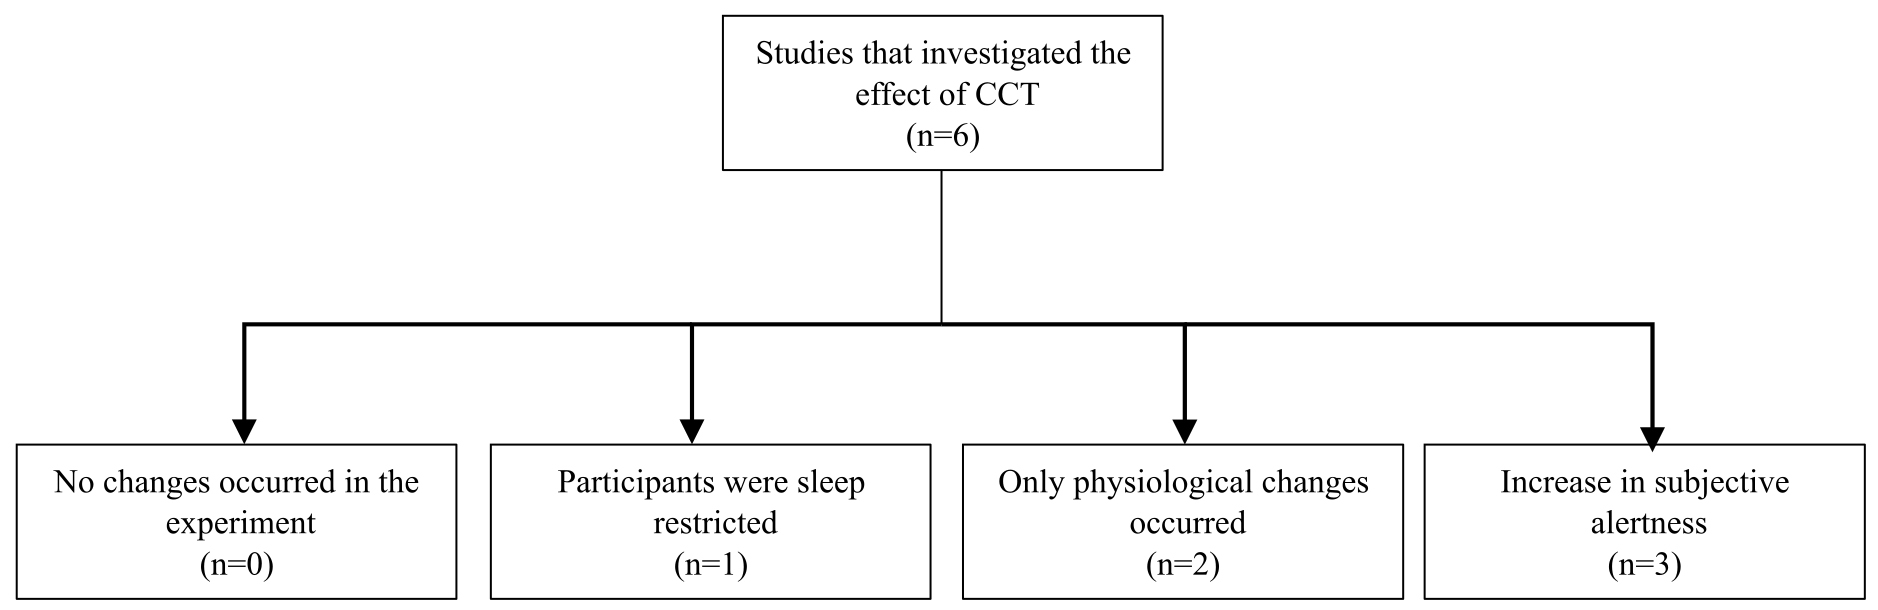 Studies that investigated the effect of CCT on alertness and the main conclusions.